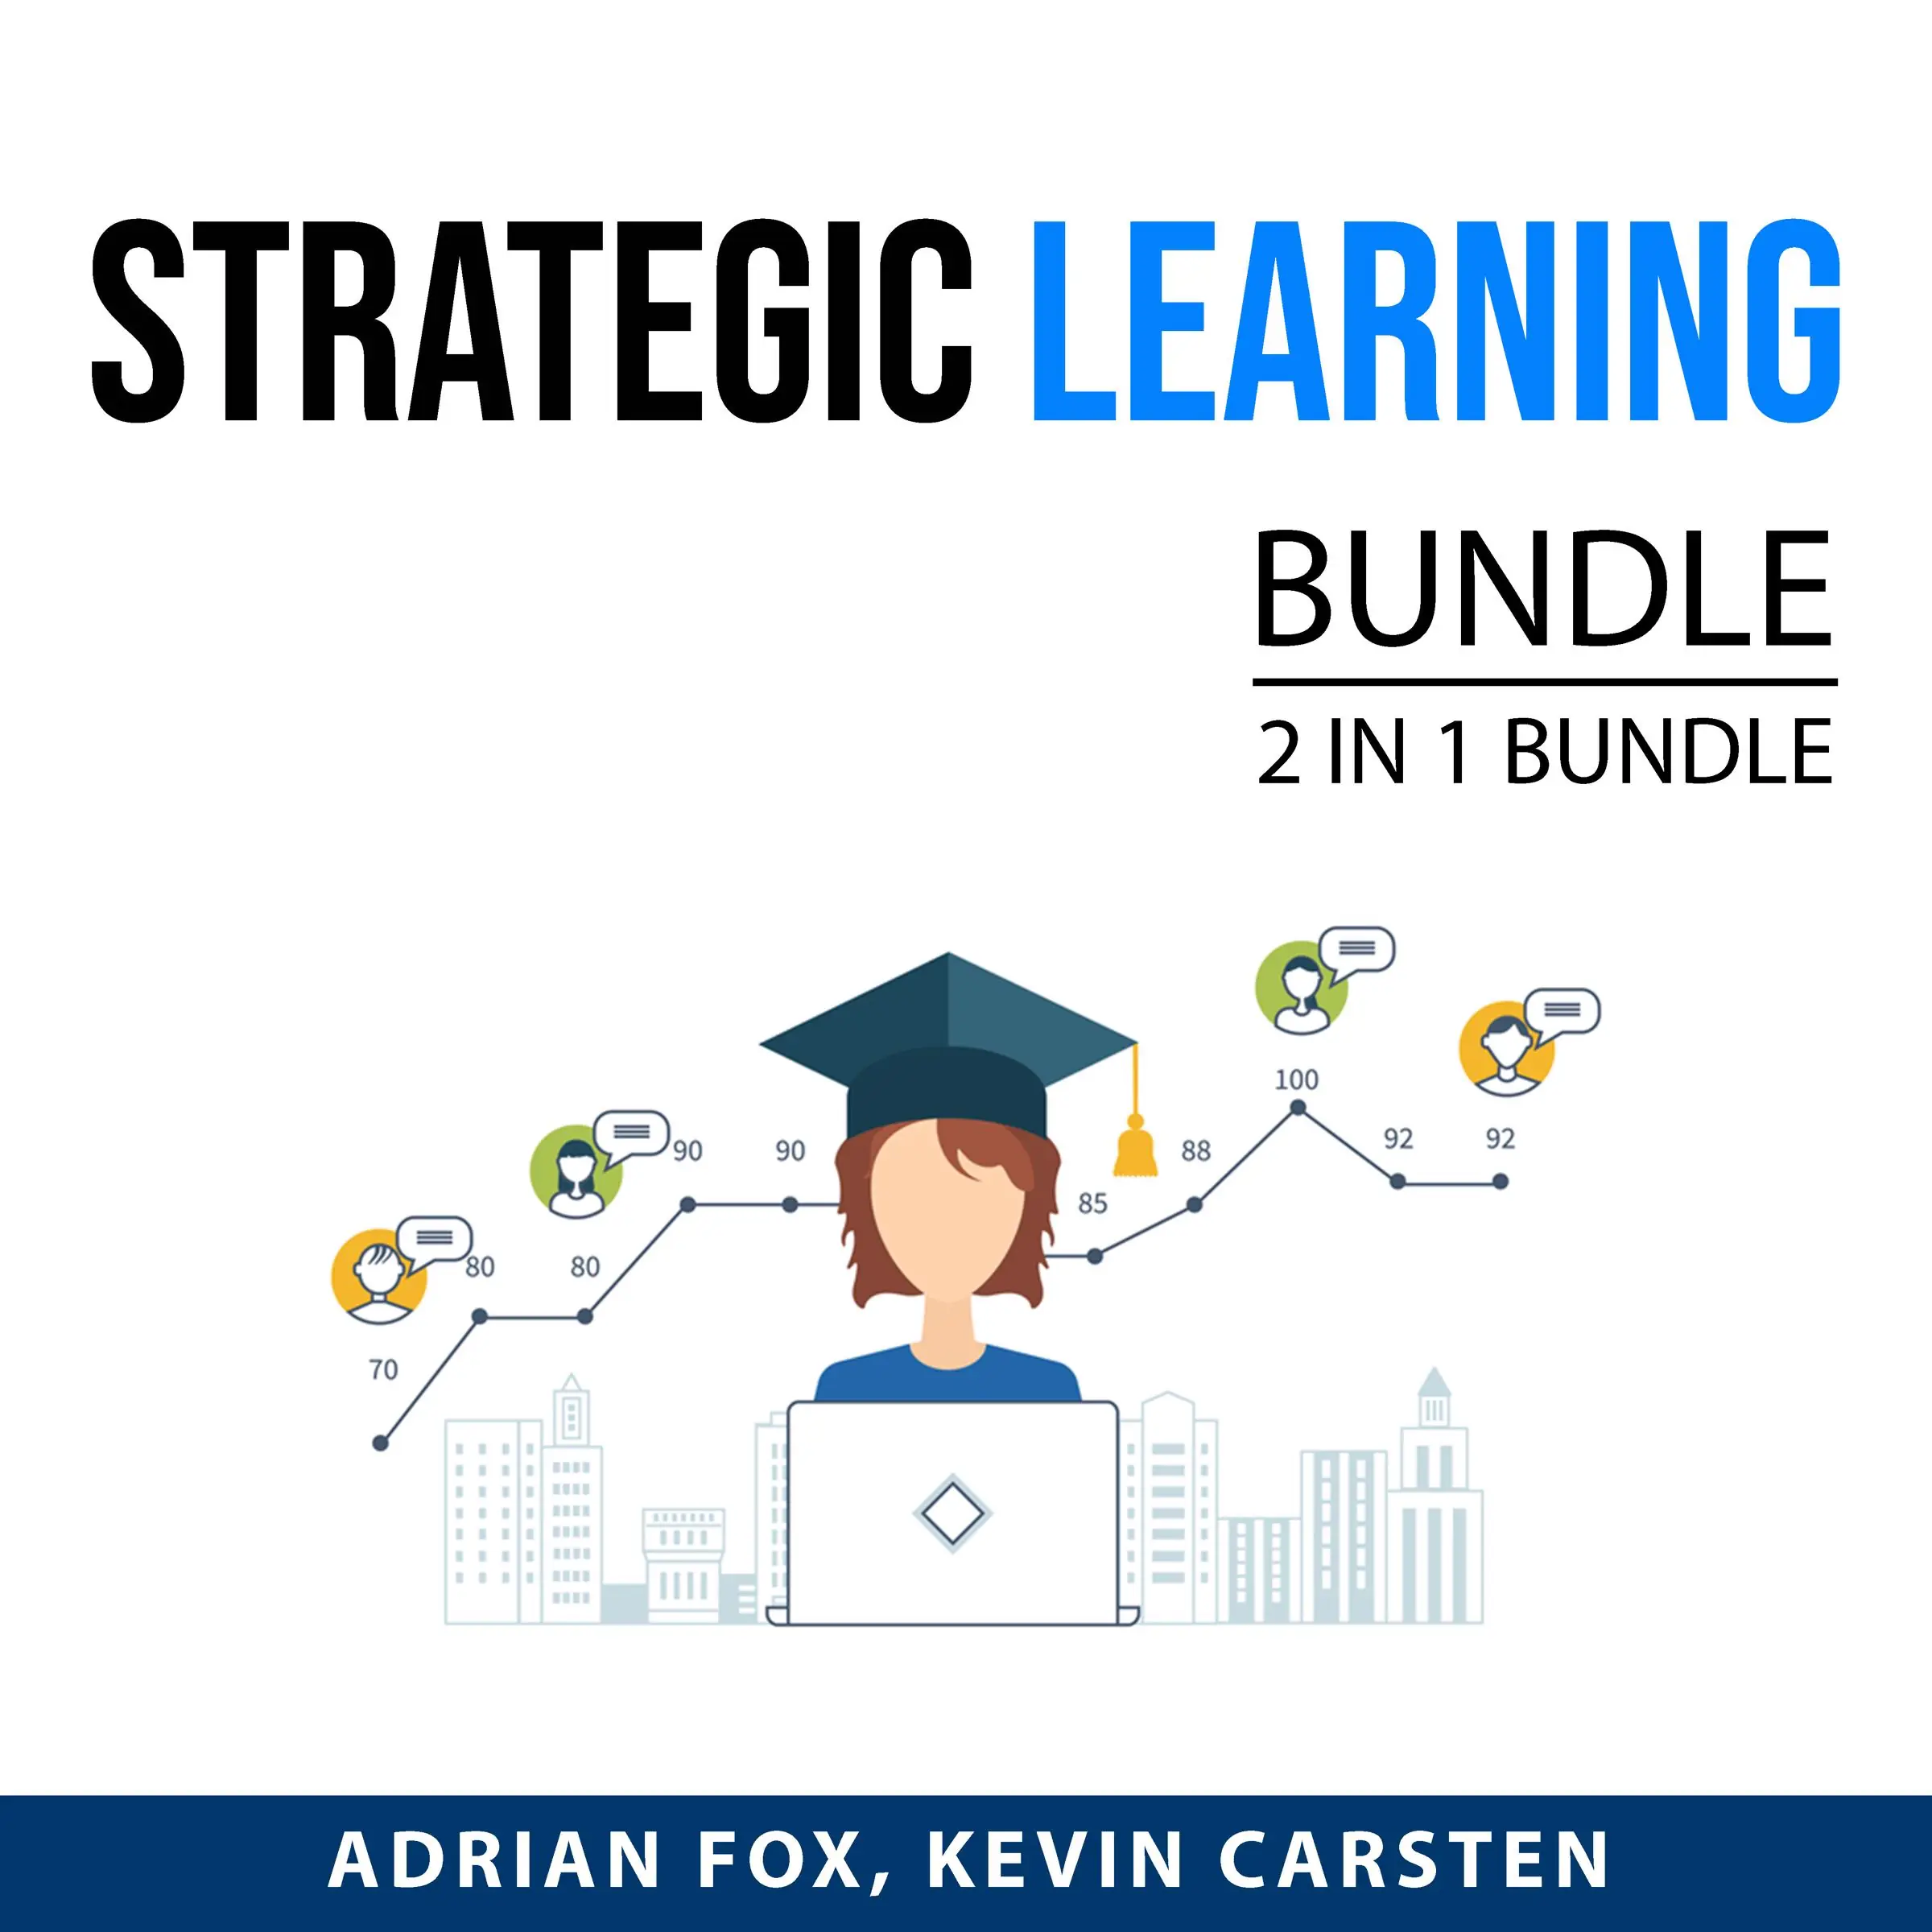 Strategic Learning Bundle, 2 IN 1 Bundle: Learn Like Einstein and Master Student by and Kevin Carsten Audiobook